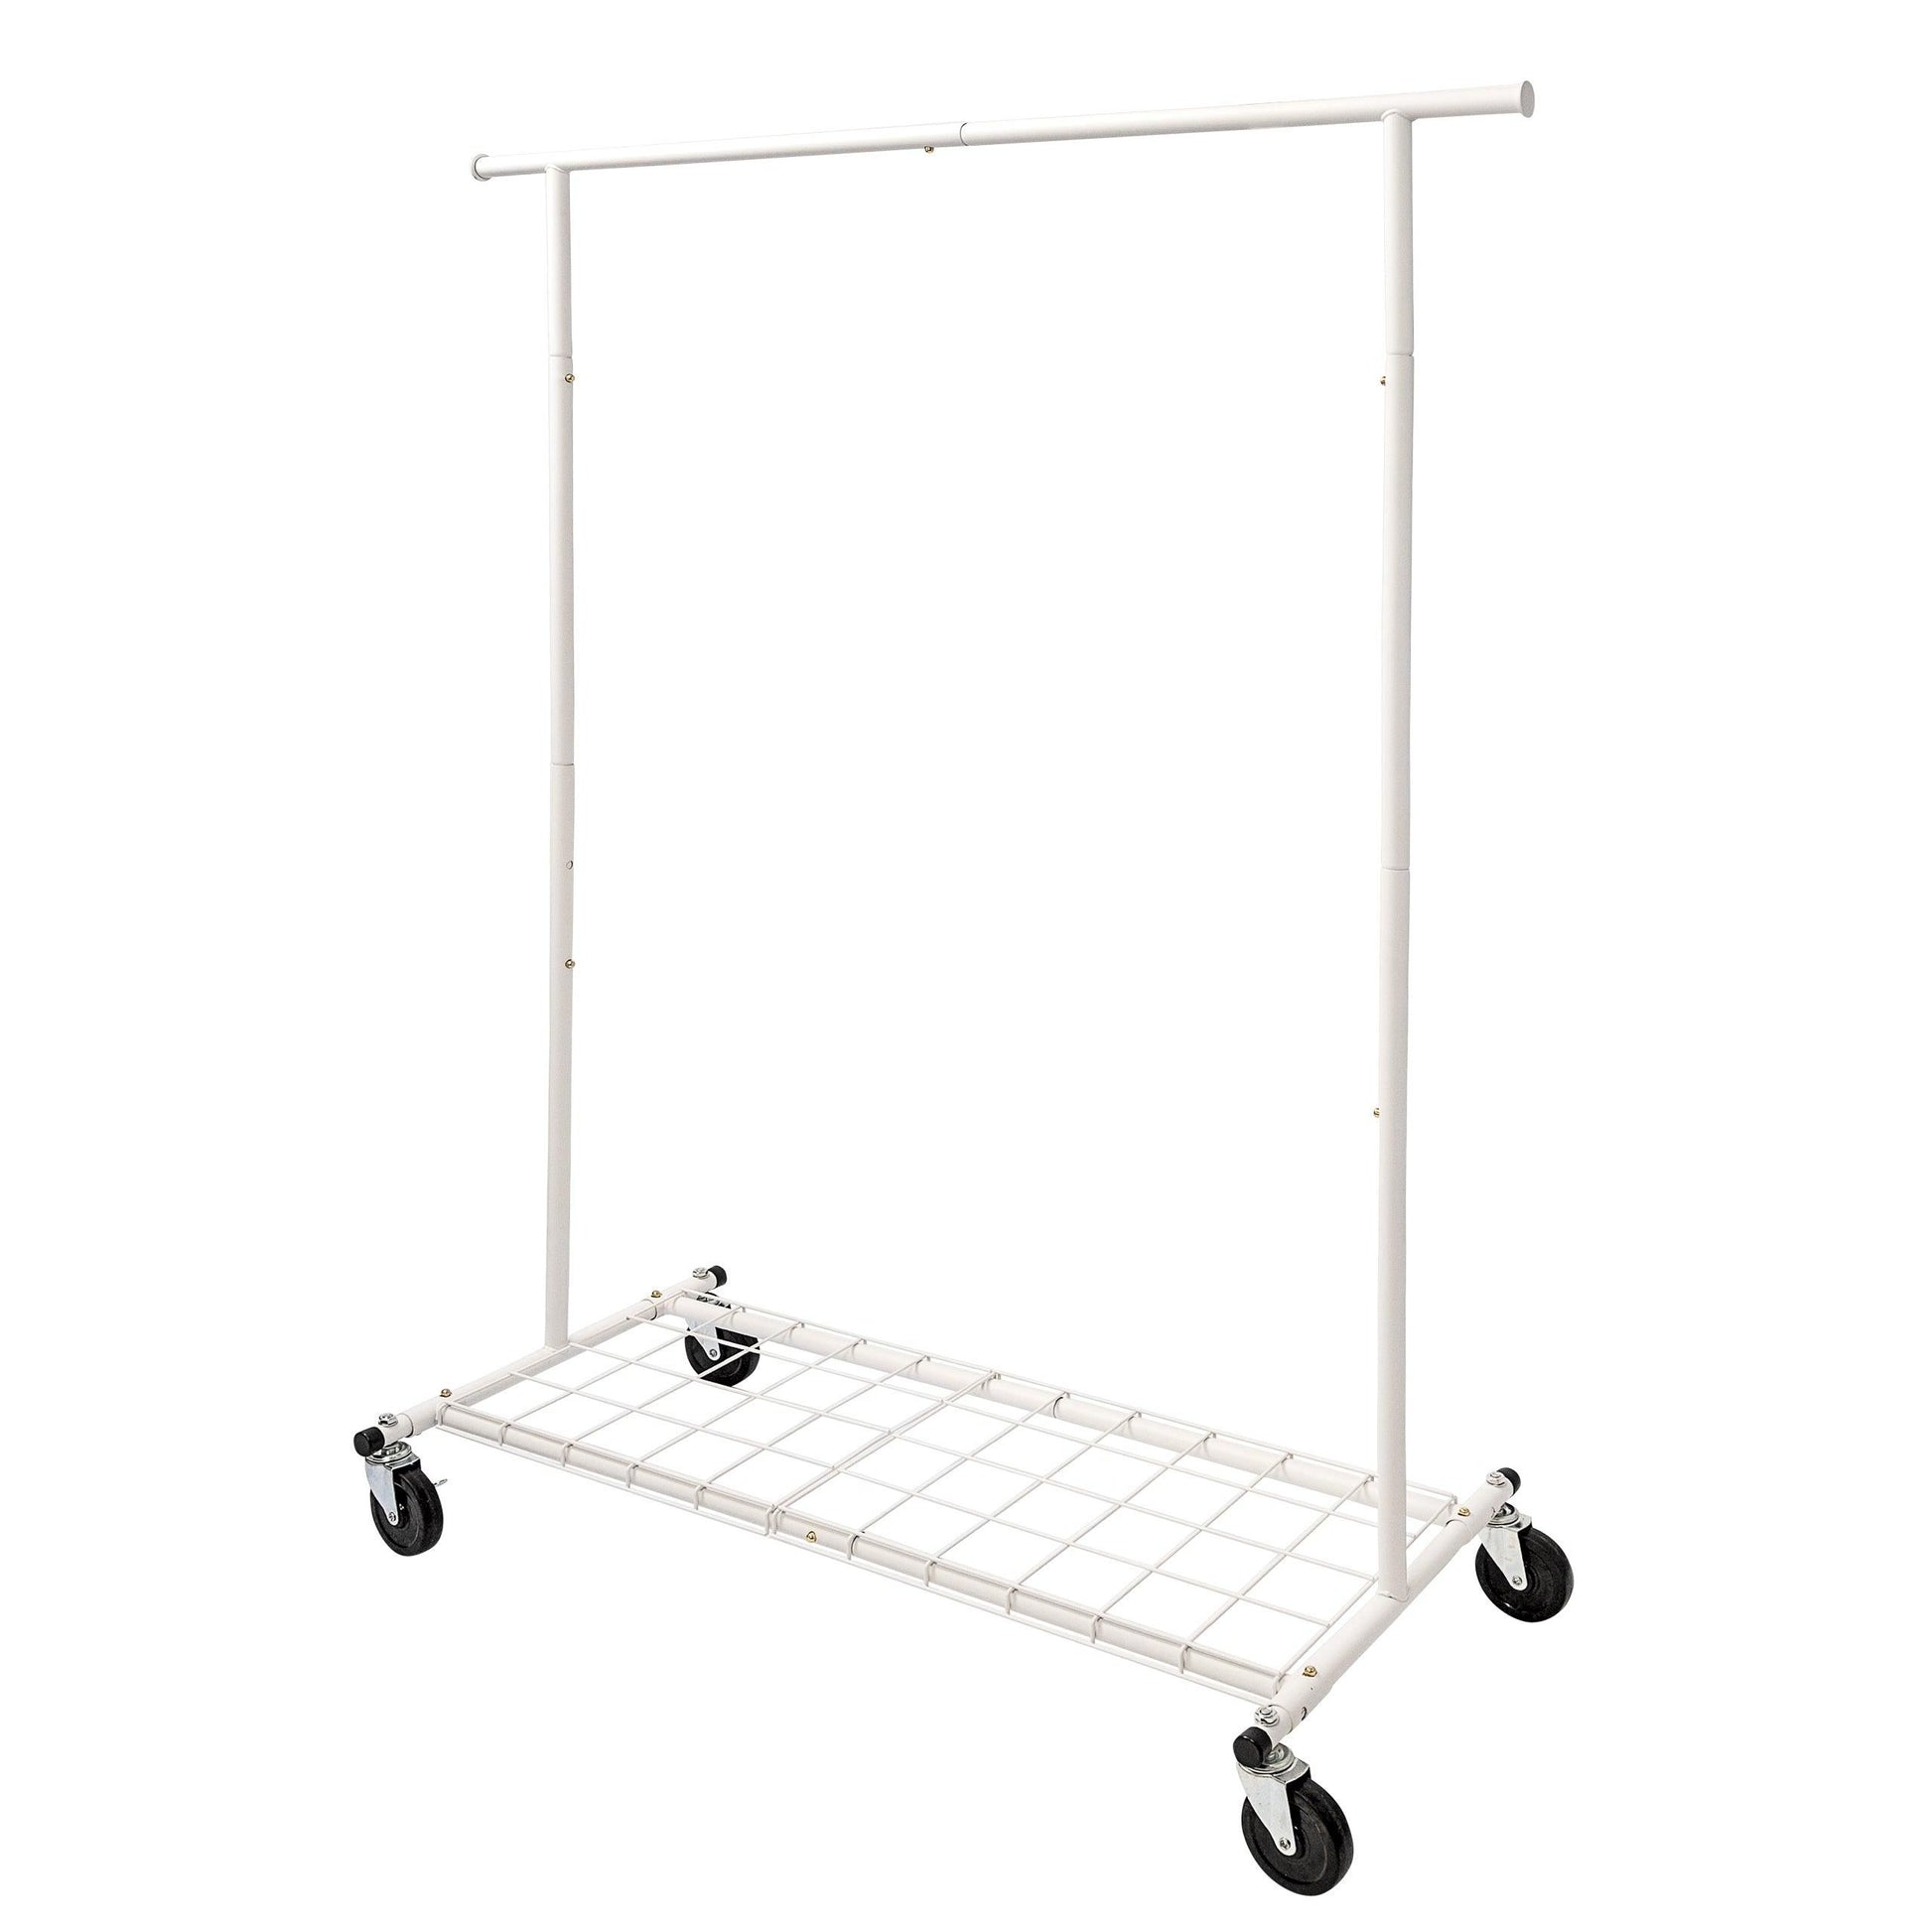 Standard Matte White Metal Clothes Rack With Removable Bottom Panel -100kgs Weight Capacity - Heavy Duty Large Rubber Casters - Hangersforless